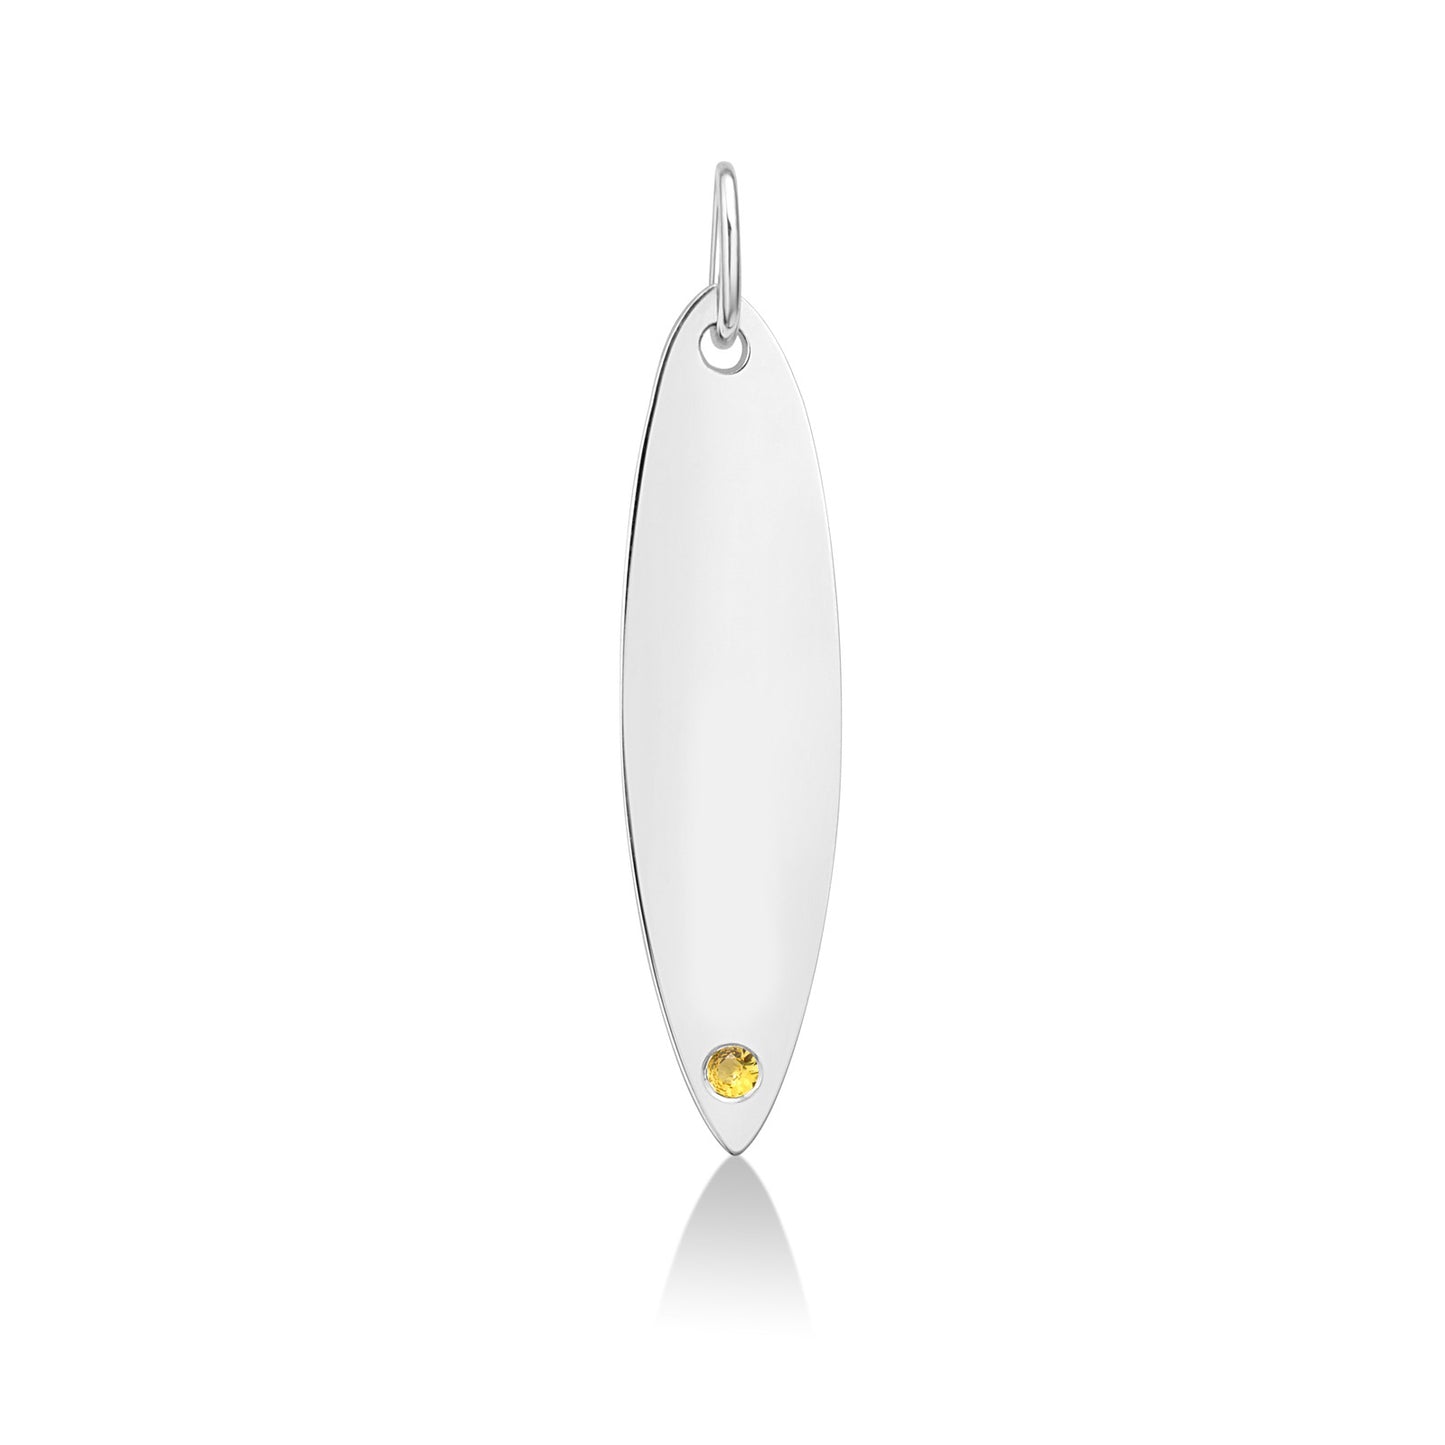 14k white gold surfboard charm lock with yellow topaz